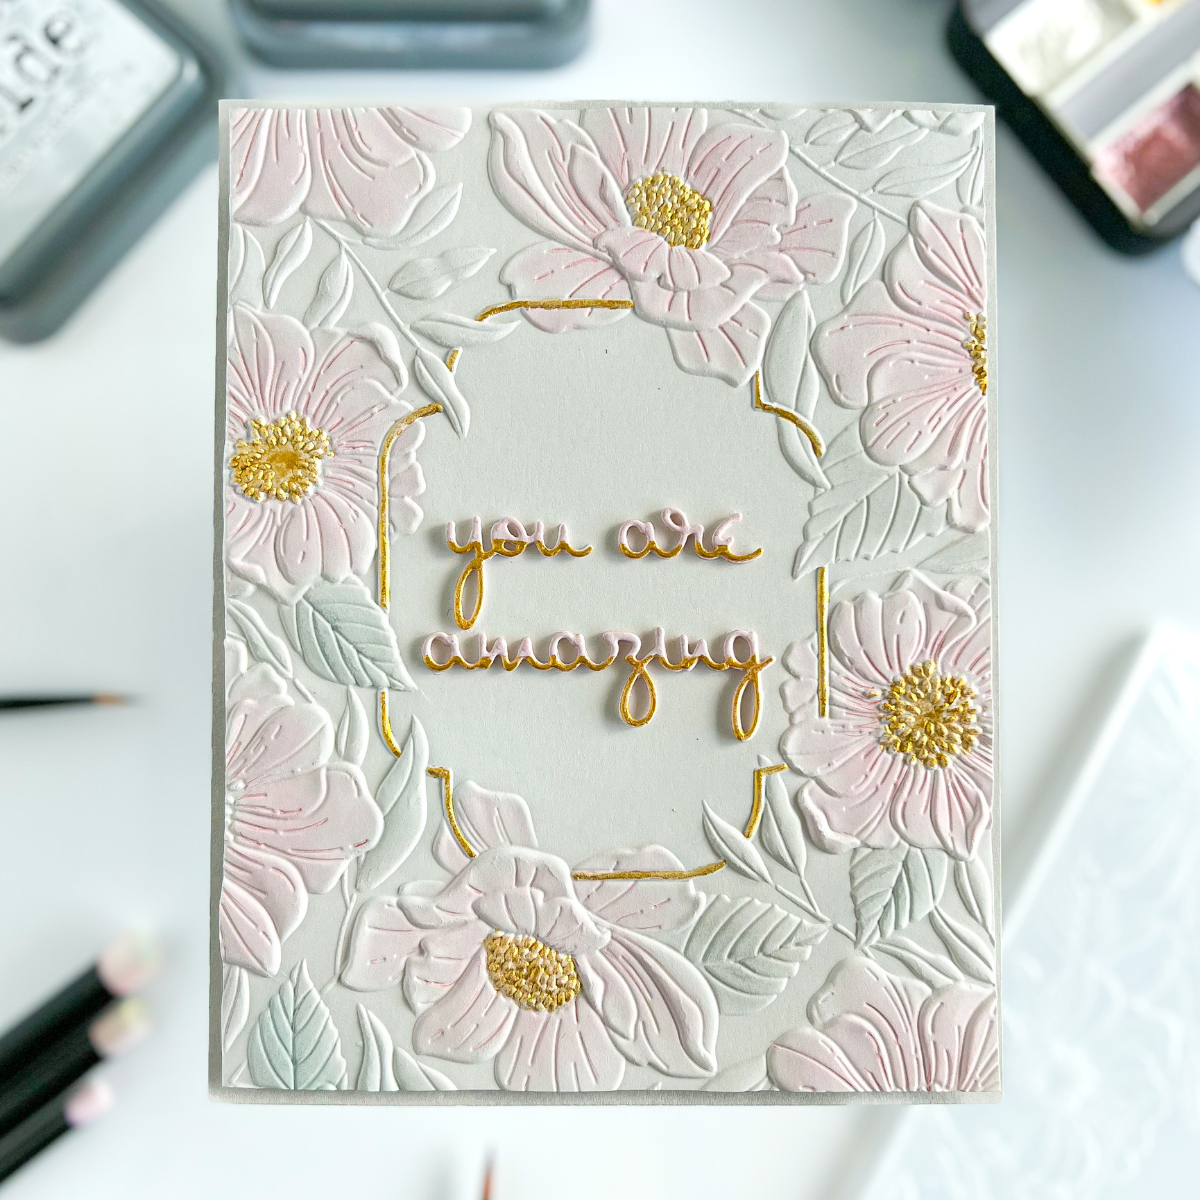 Card Making Hack to Create ✨ Gold ✨ Accents - Nicki Hearts Cards